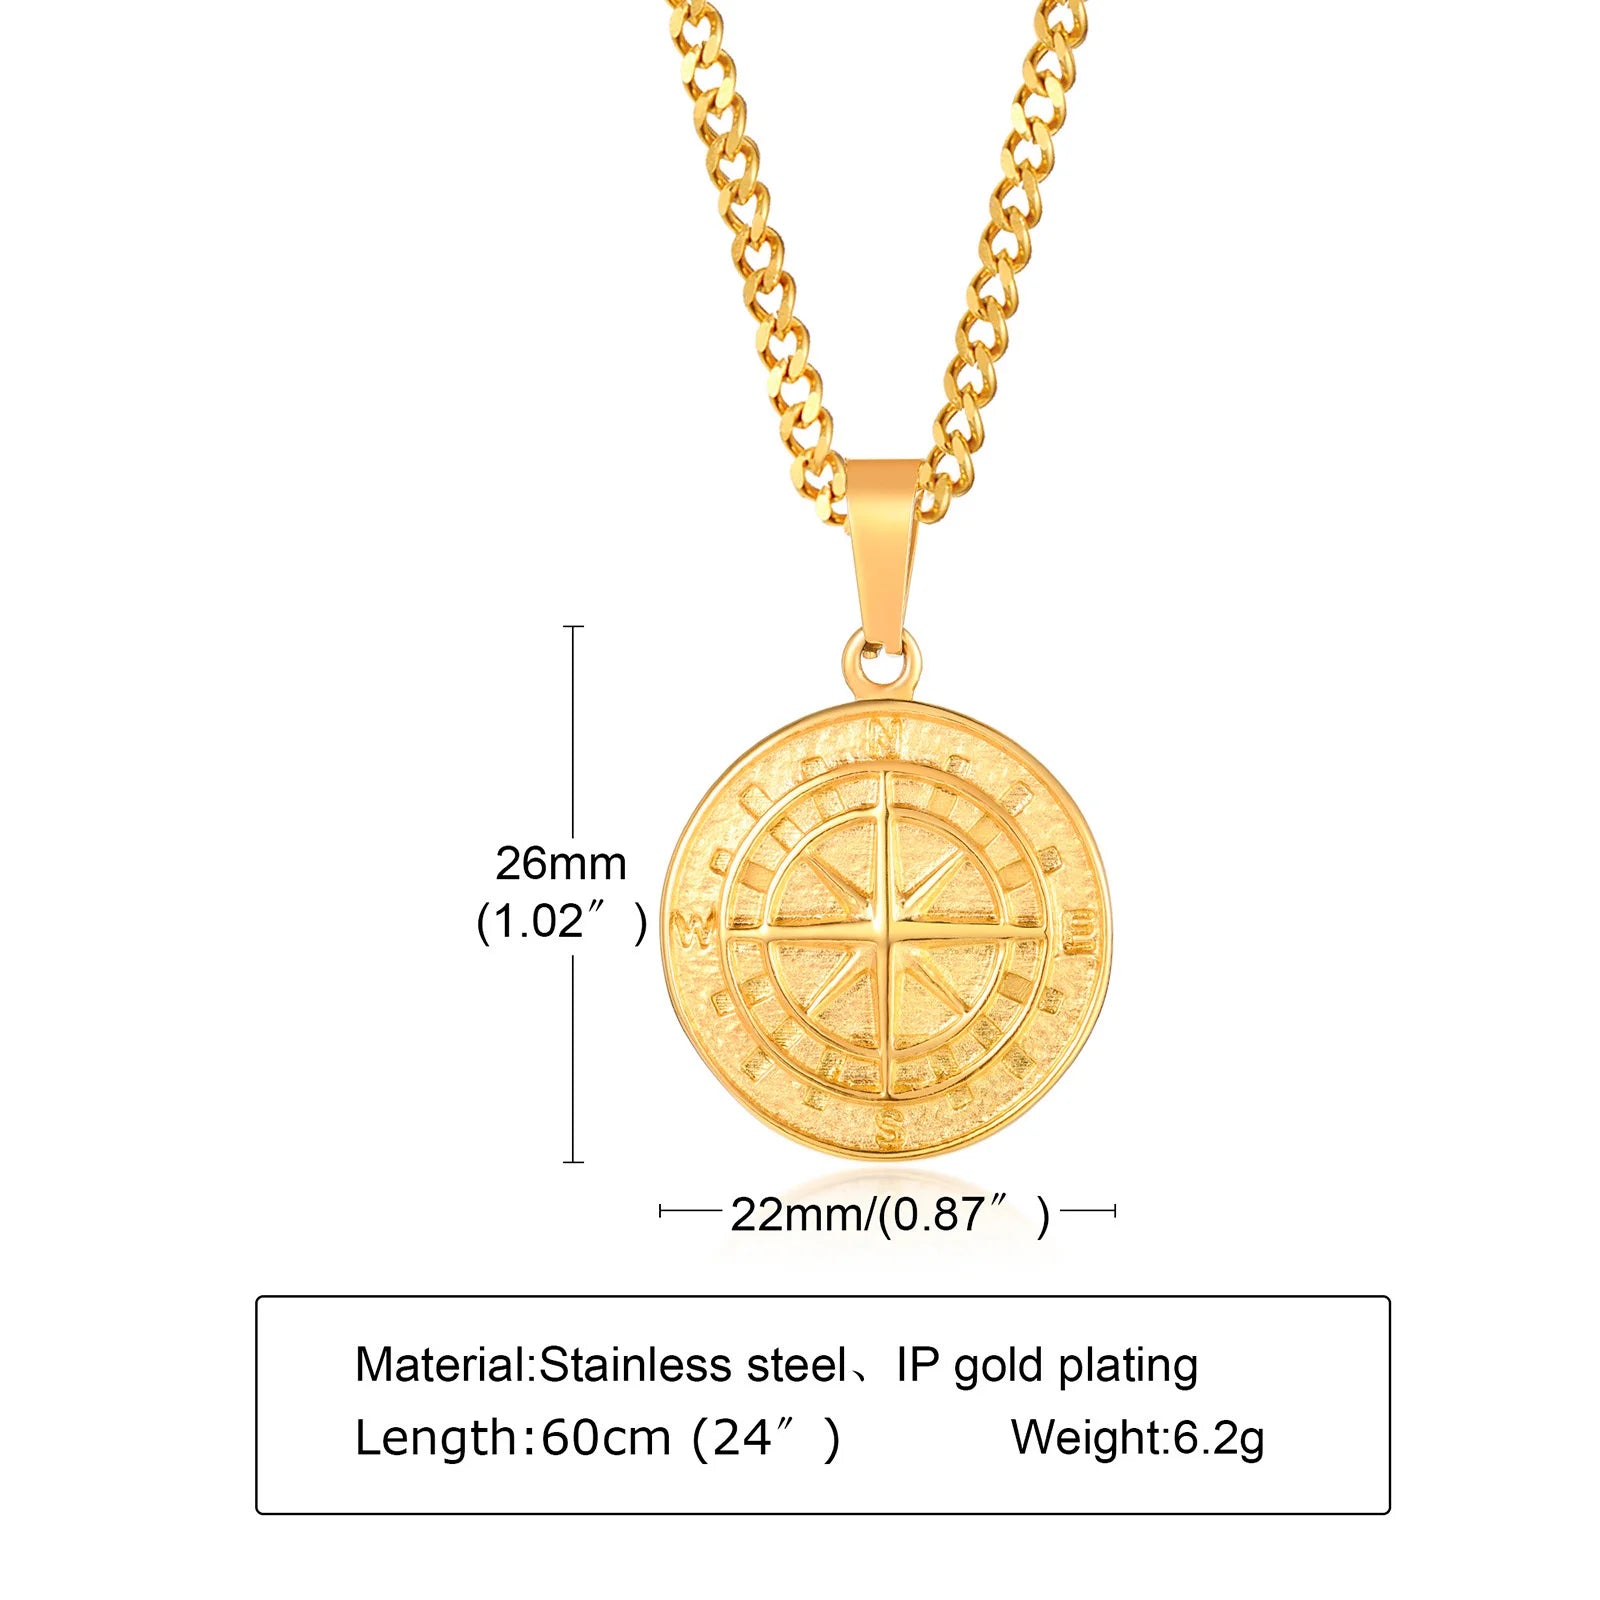 COMPASS PENDANT WITH CHAIN